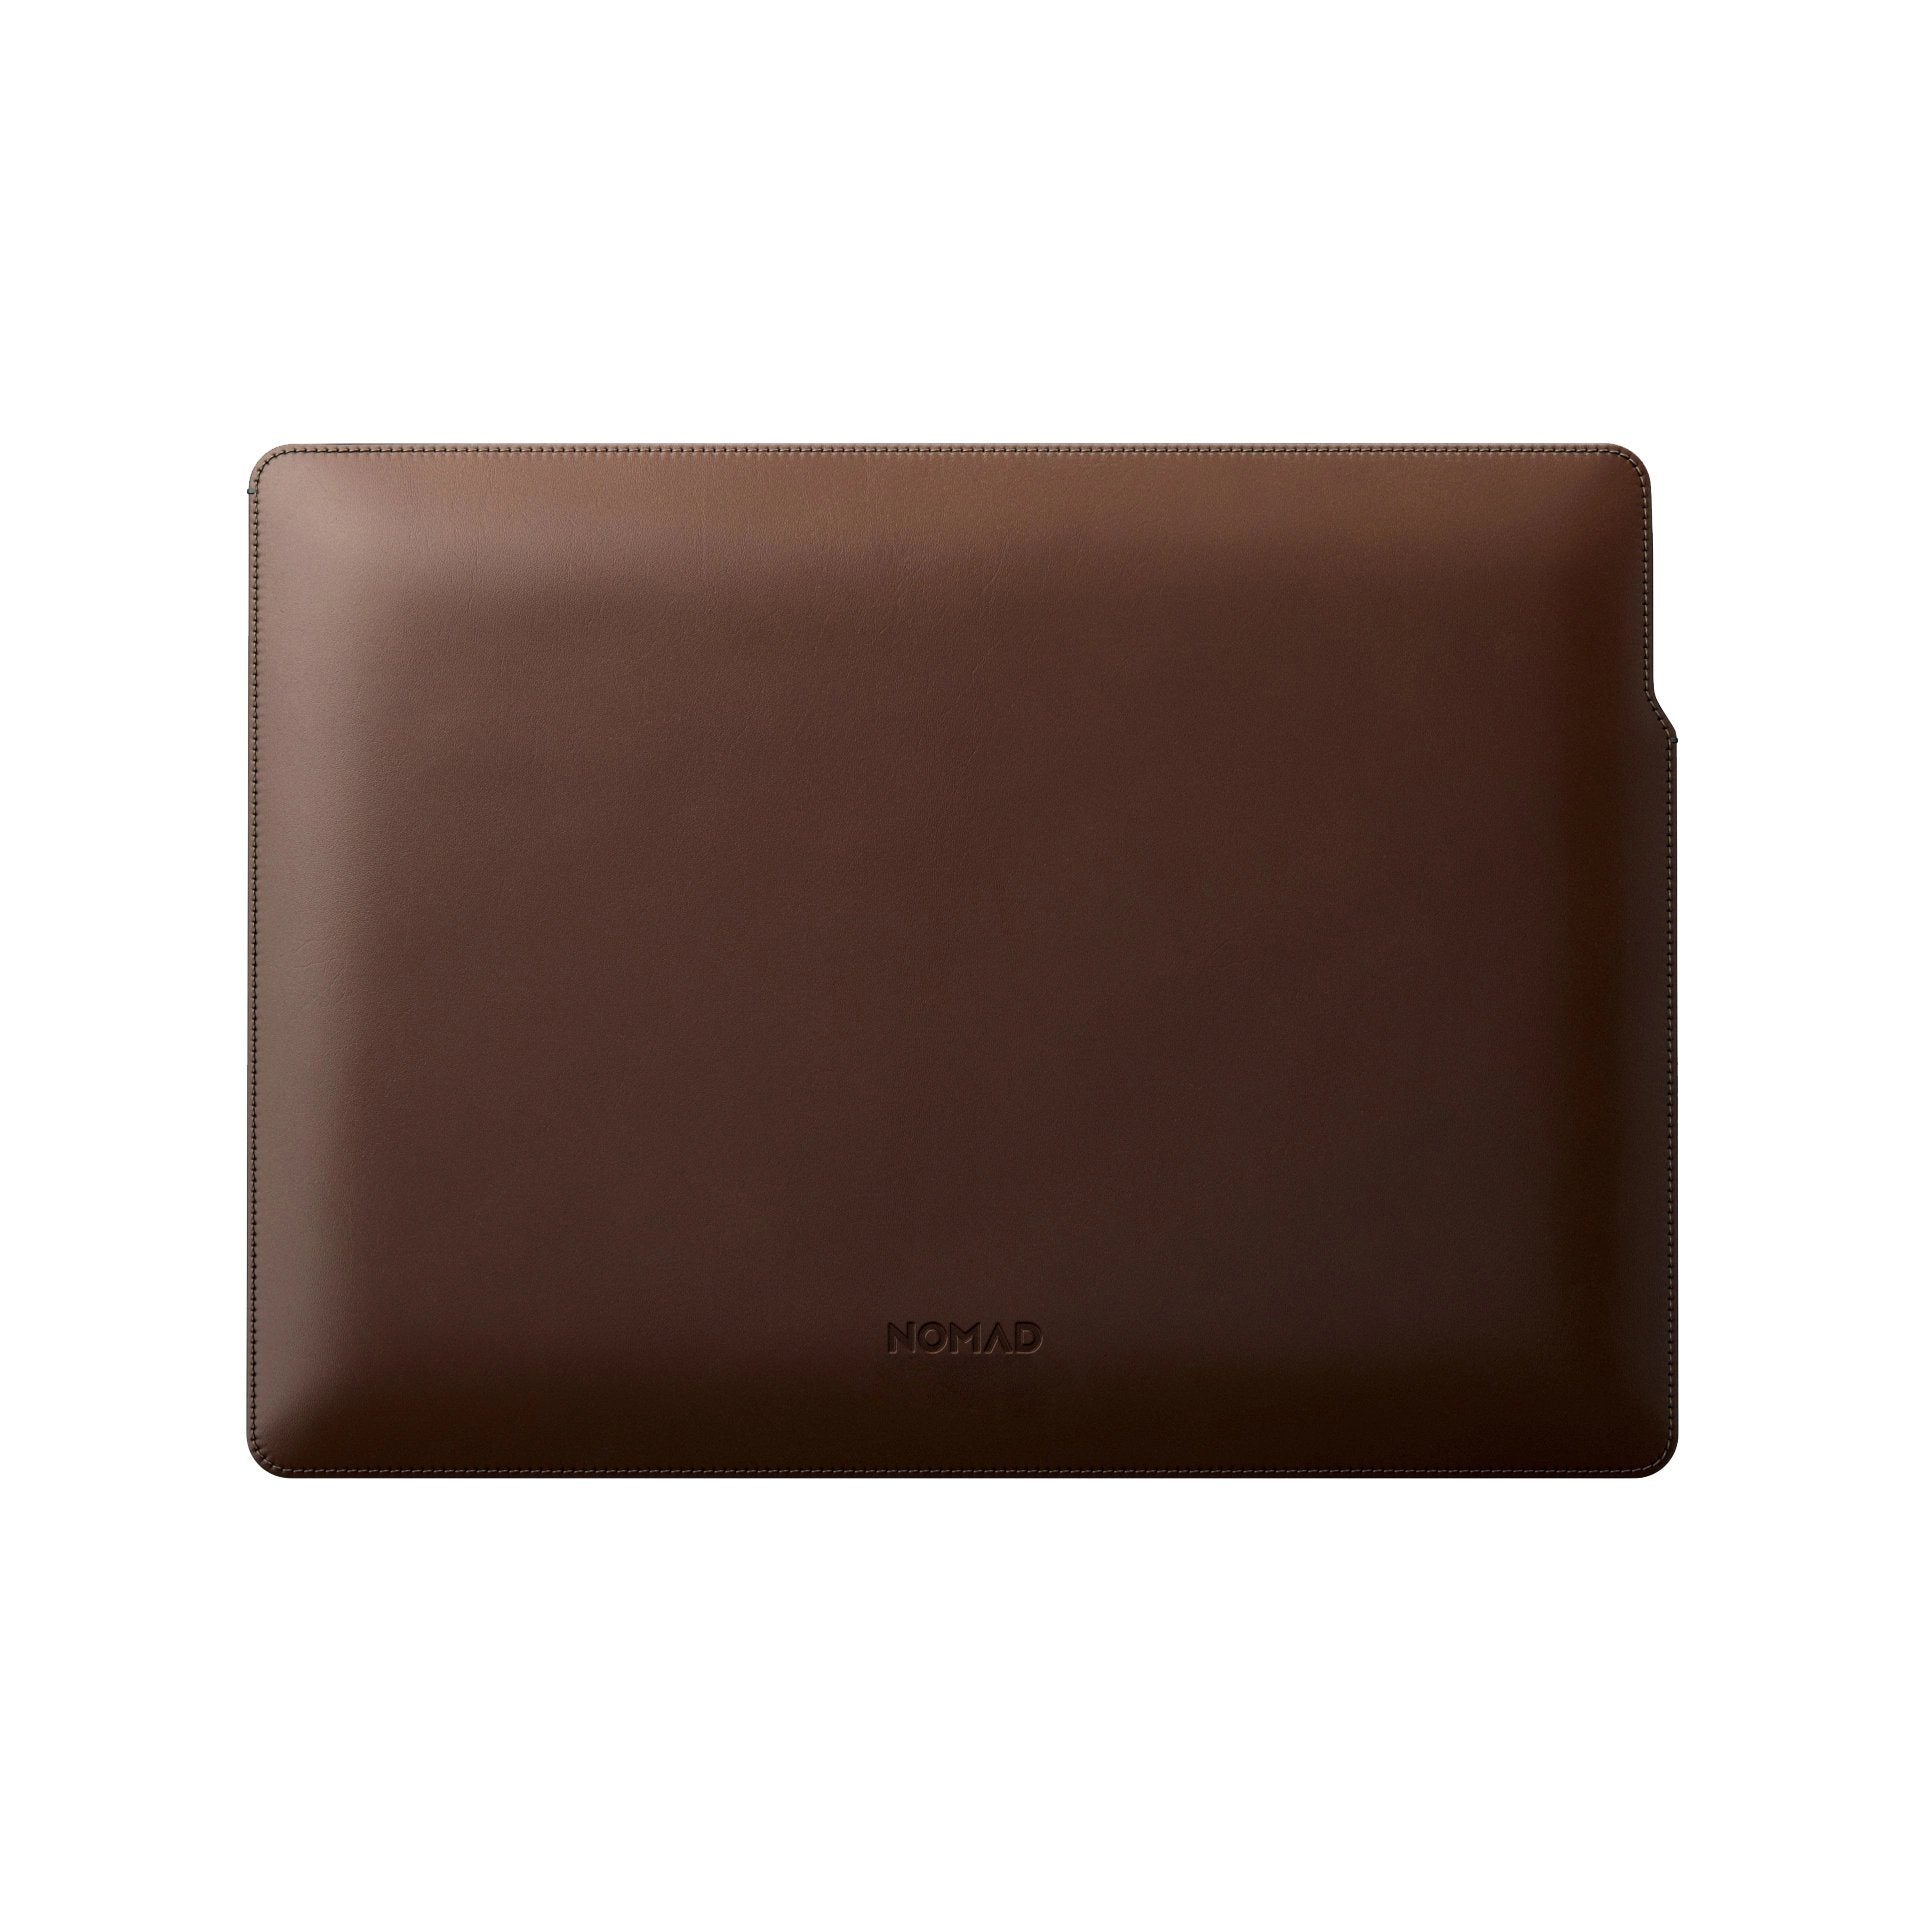 NOMAD Horween Leather Sleeve for MacBook Pro 16", Rustic Brown Default NOMAD 